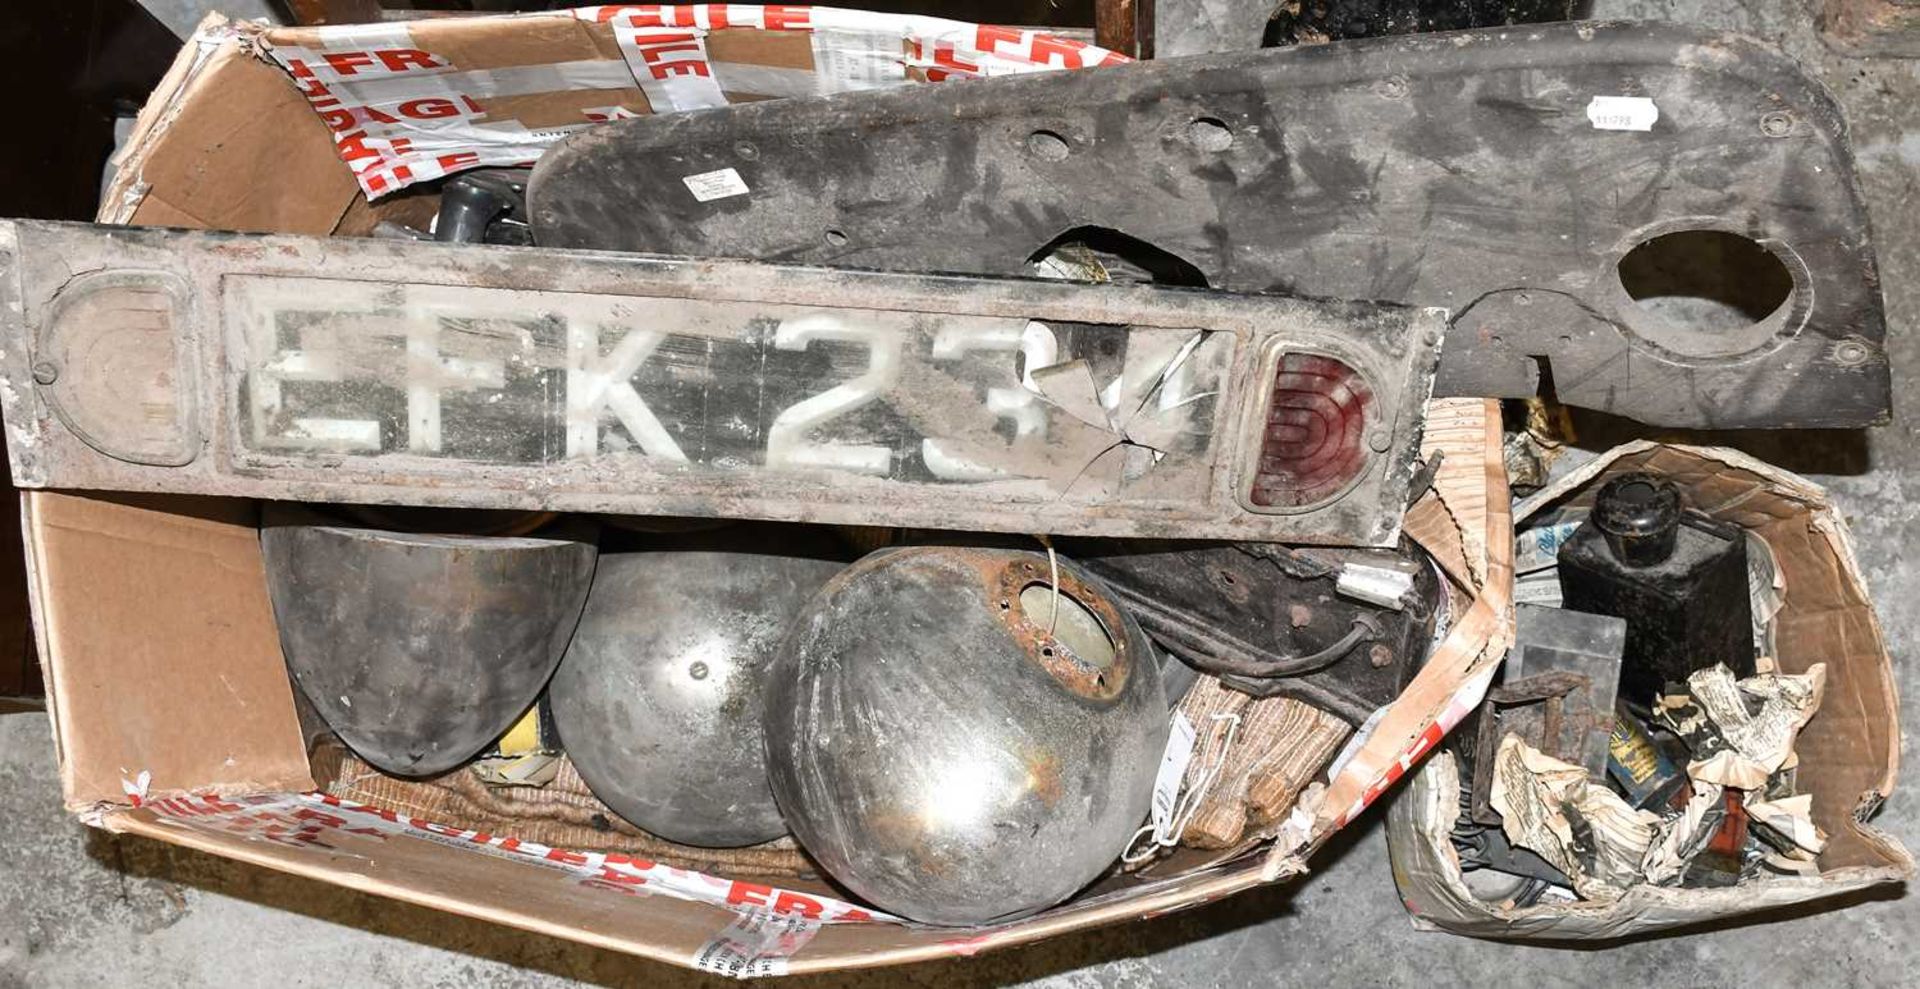 ~ A Quantity of 1920/30's Car Spares, including: Headlamps, Car Dashboard, Rear Number Plate (EFK